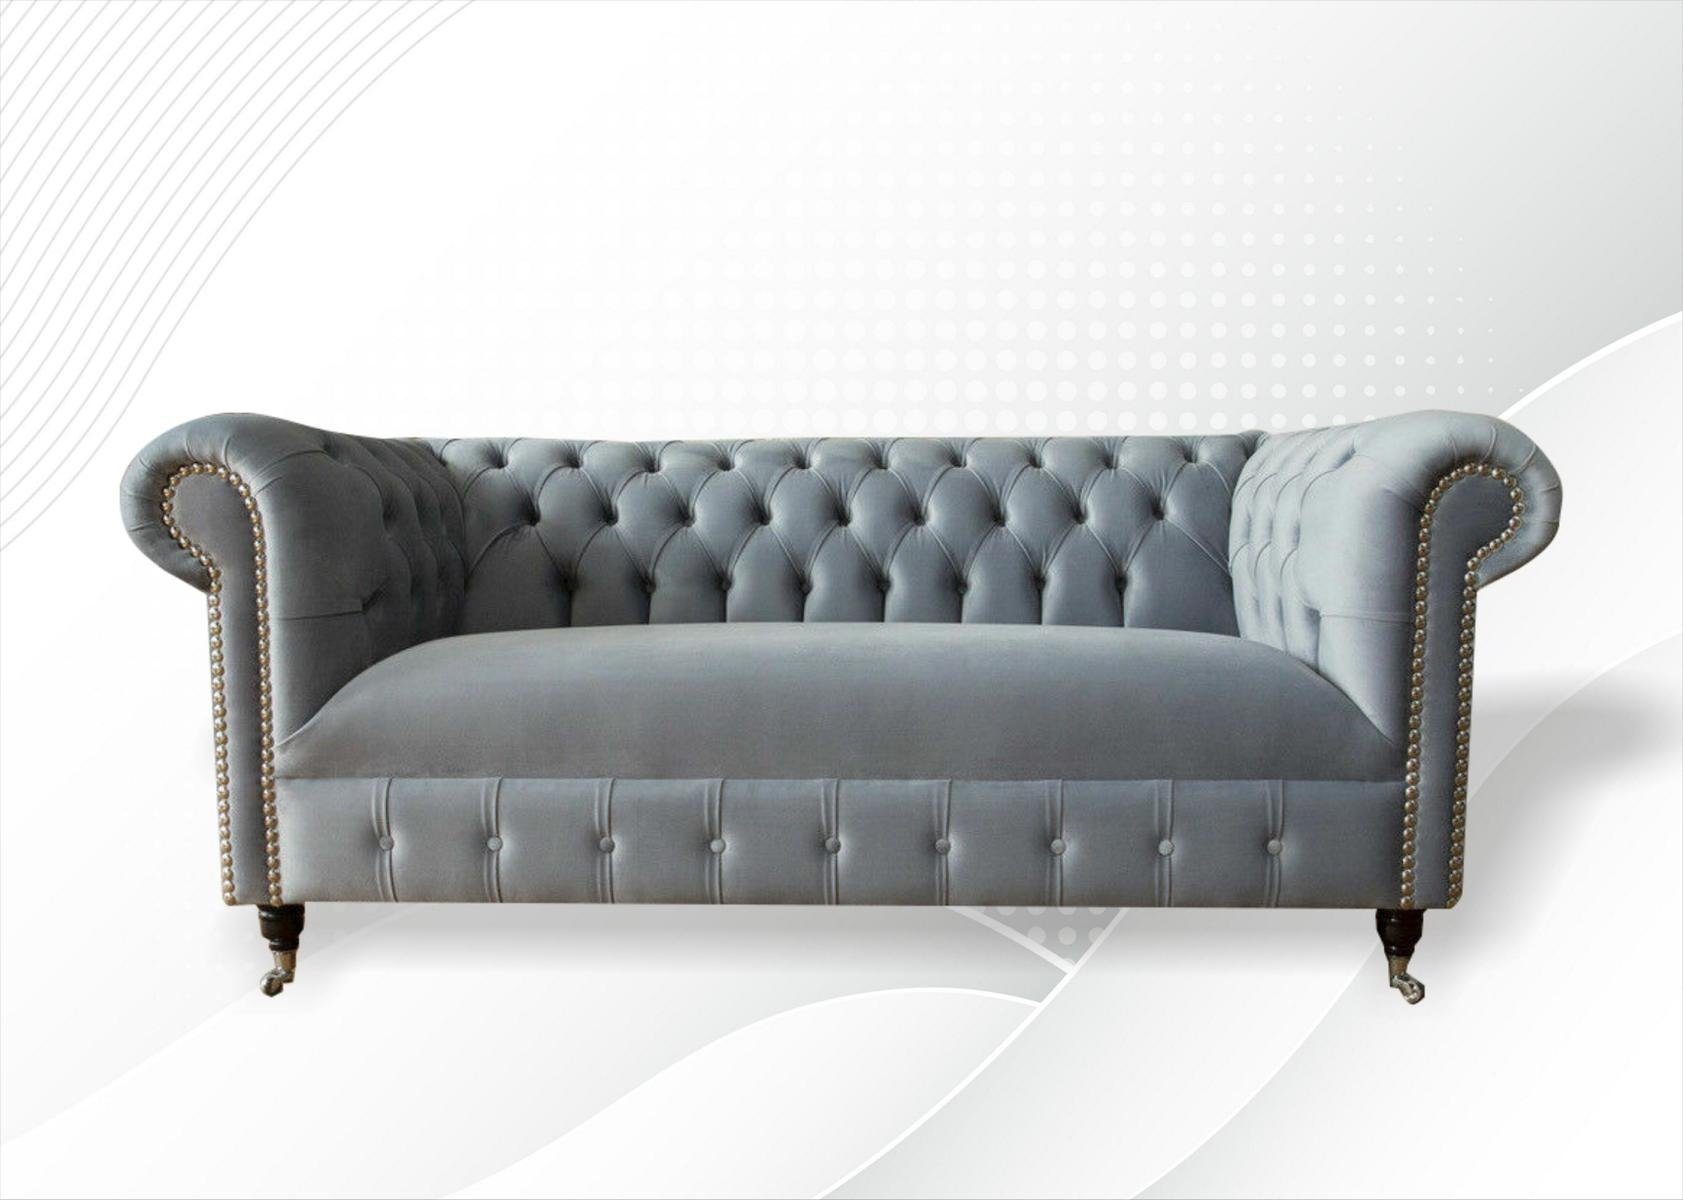 Couch Couchen Chesterfield Textilmöbel, JVmoebel Stoff Made Leder Polster Sofa Sofa Europe in